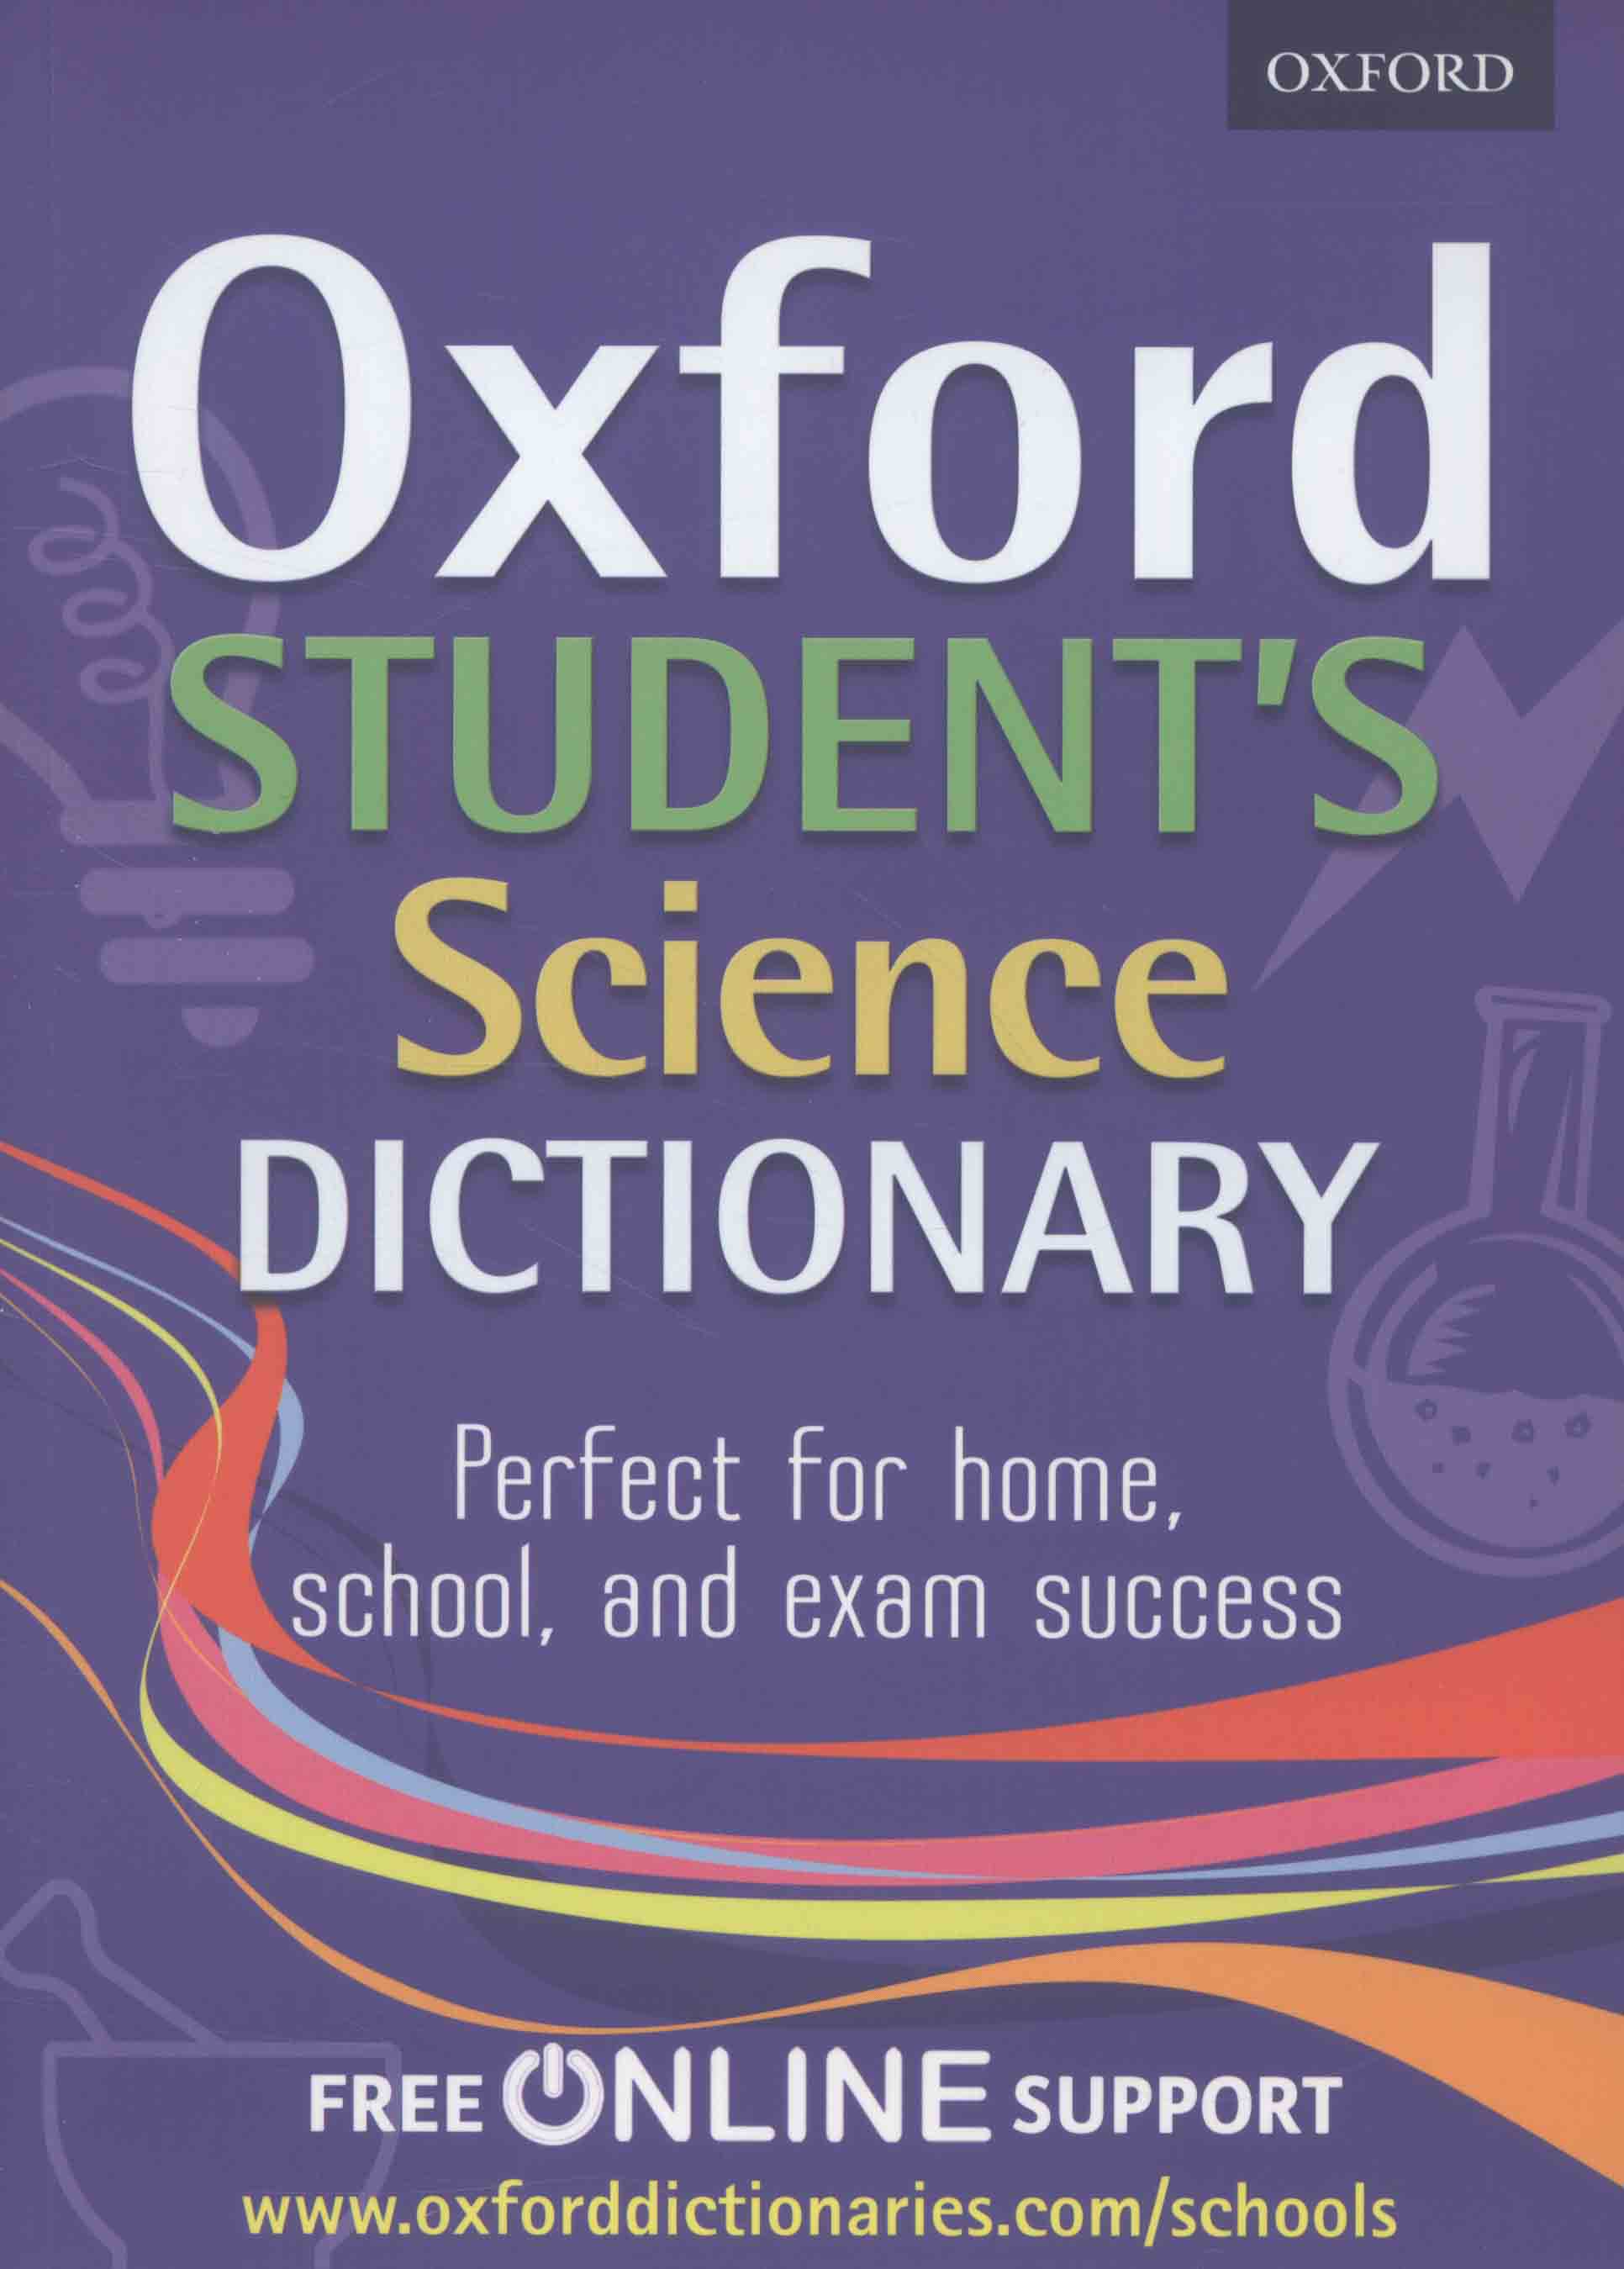 thesis meaning by oxford dictionary